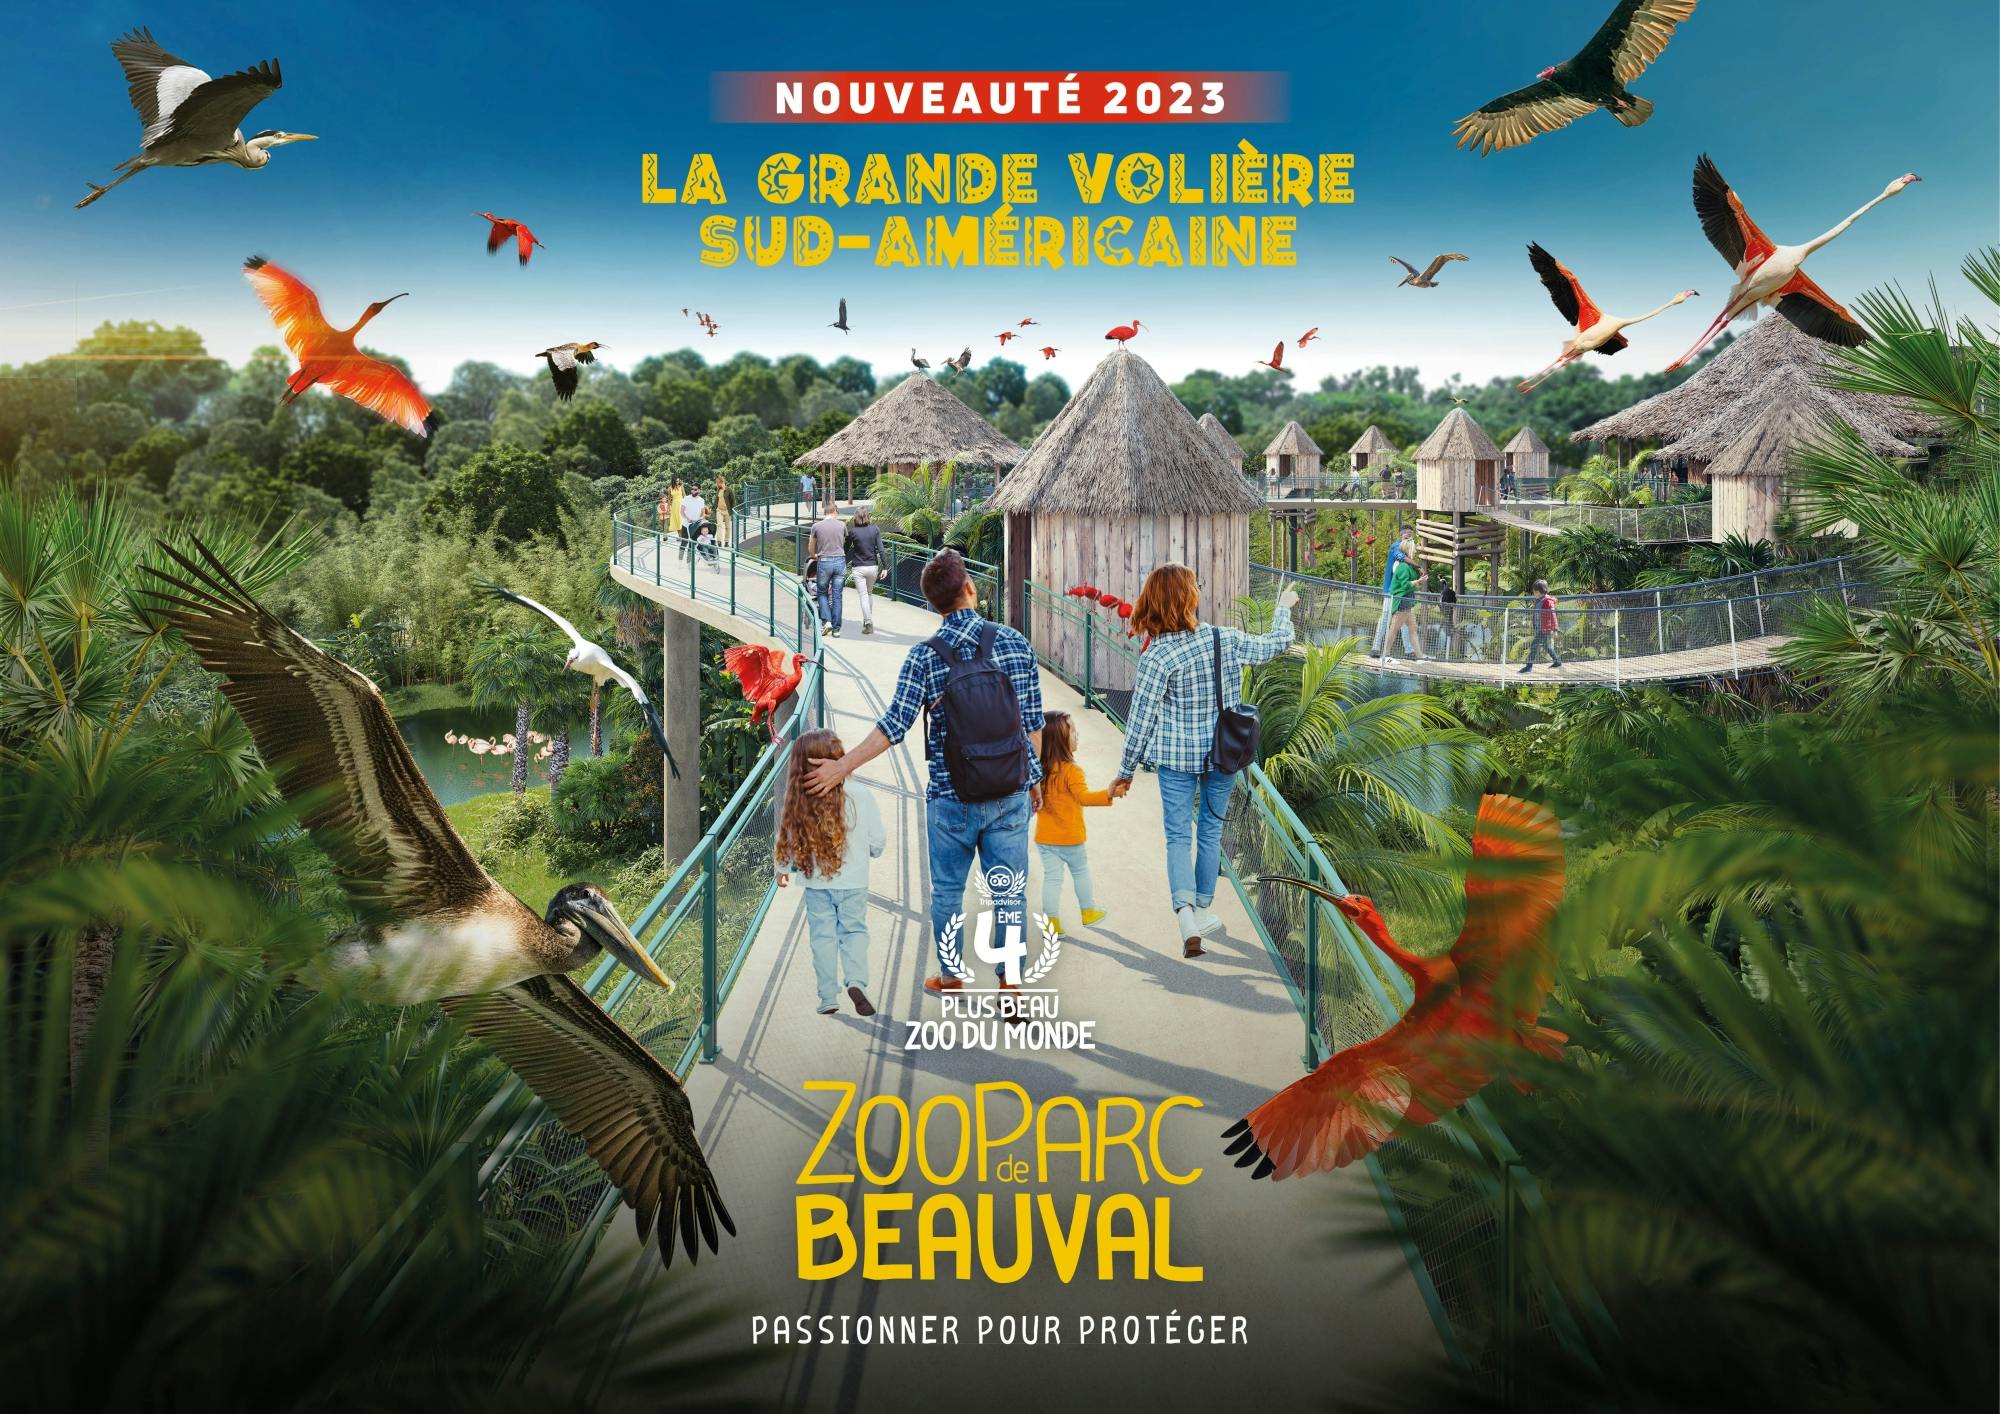 Entrance ticket for ZooParc de Beauval